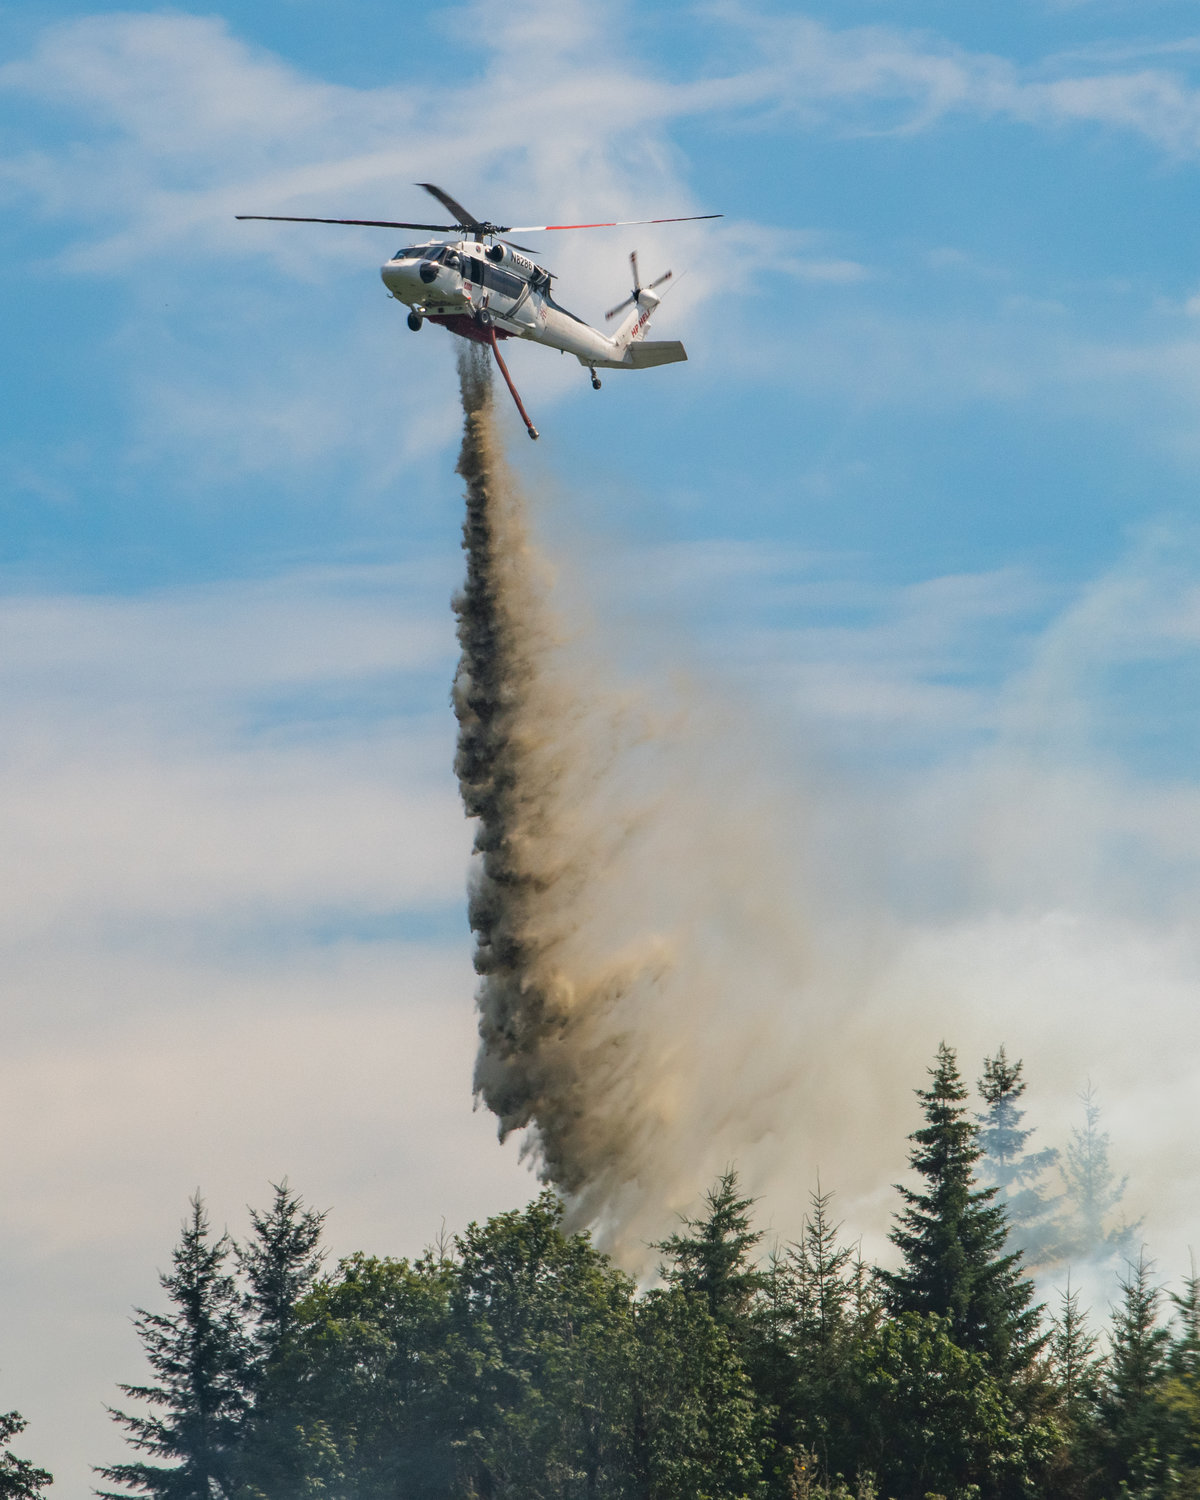 A Department of Natural Resources helicopter flies over Bucoda Monday afternoon while dumping water from the Skookumchuck River on a forest fire near the intersection of Highway 507 and Troy Avenue.